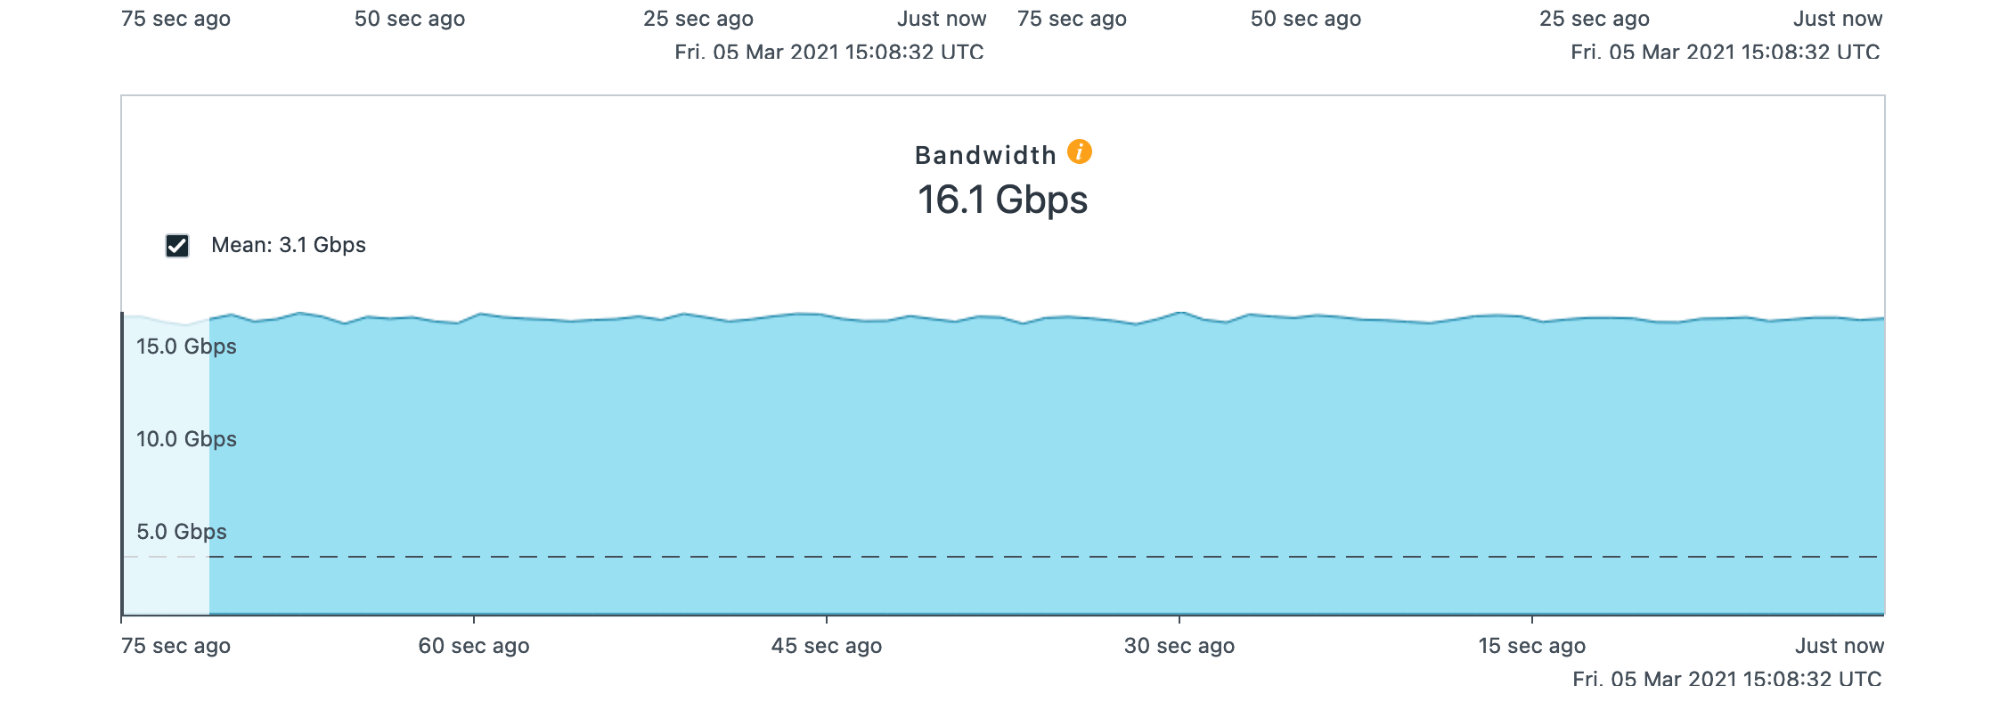 A bandwidth graph, showing traffic maxed at a steady 16.1 Gbps.